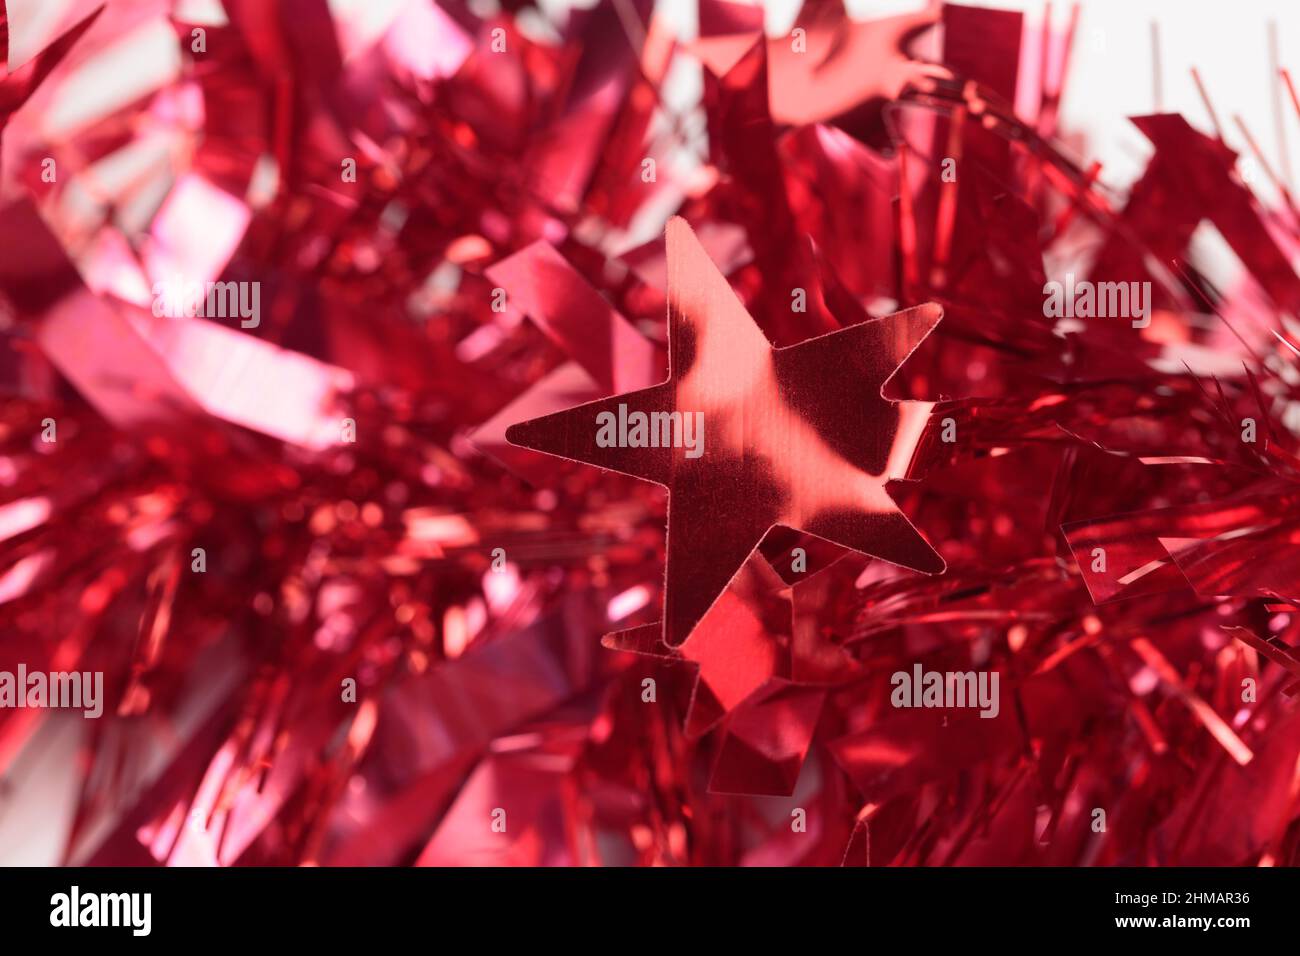 Red Christmas tinsel with stars. It occupies the entire surface of the image. Close-up. Stock Photo